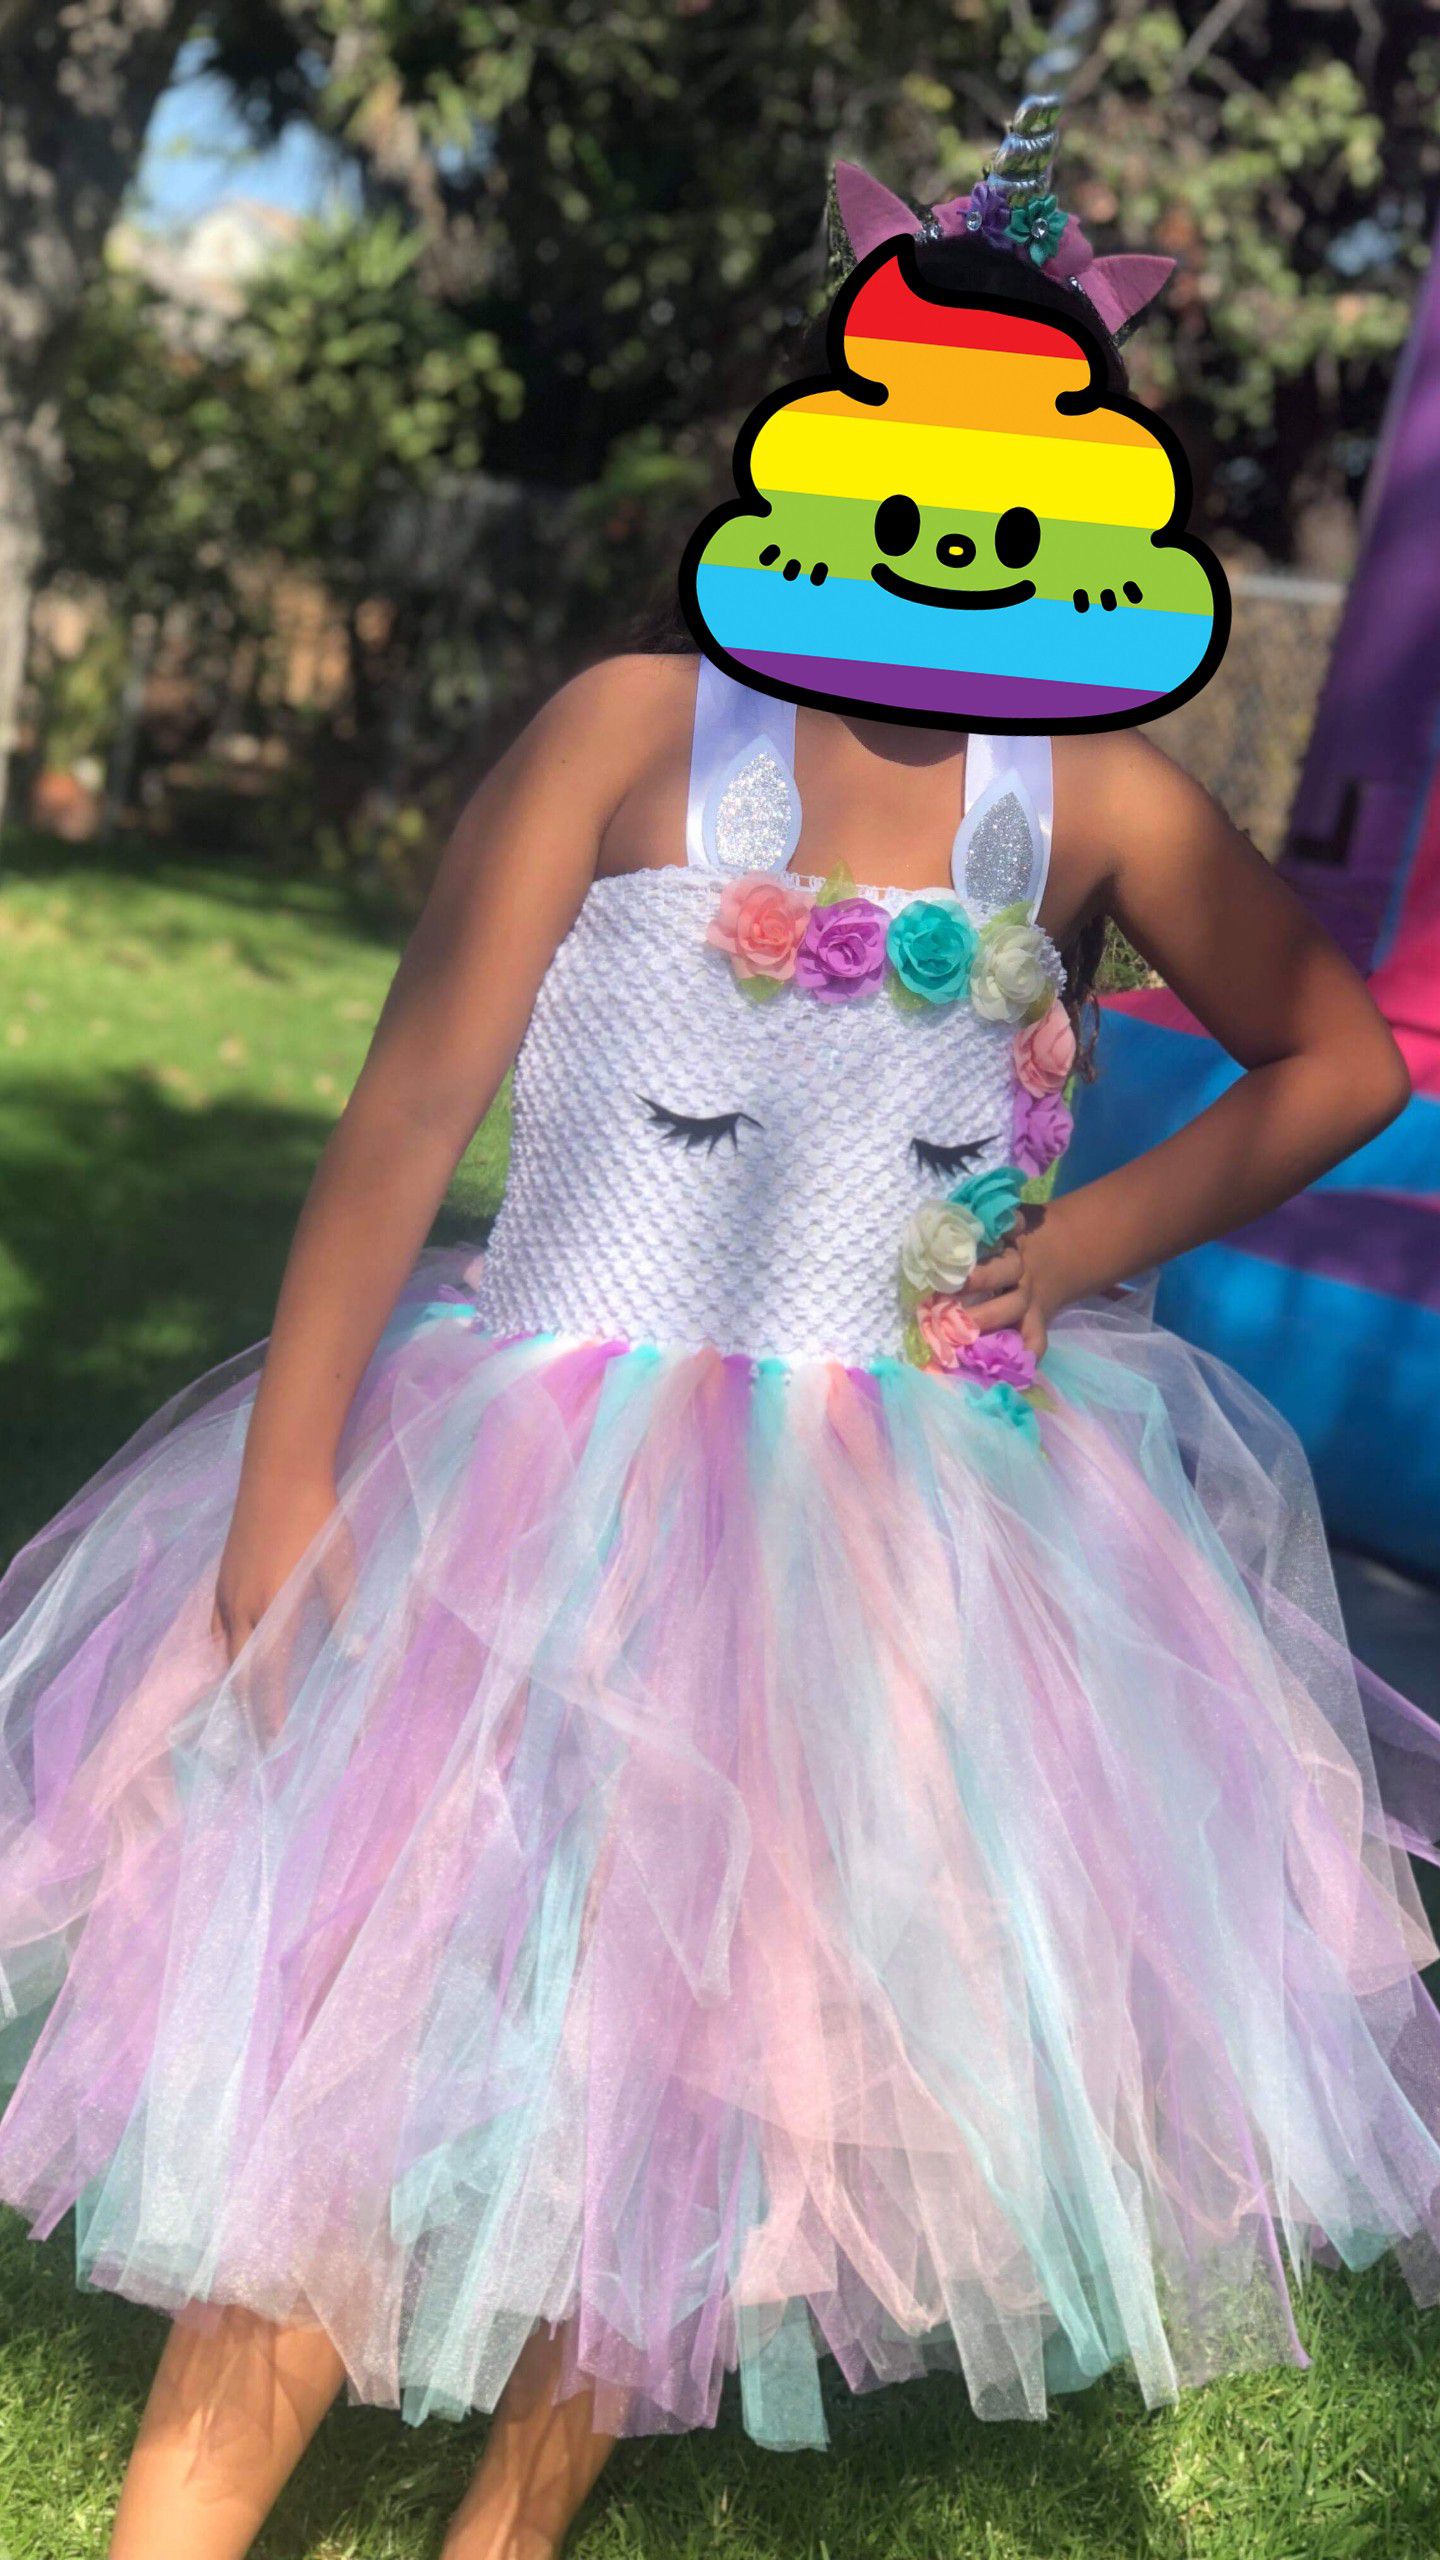 Beautiful Unicorn Dress 14/16 fits girl who usually wears size 10/12 $50 dress only worn for 30 minute for picture